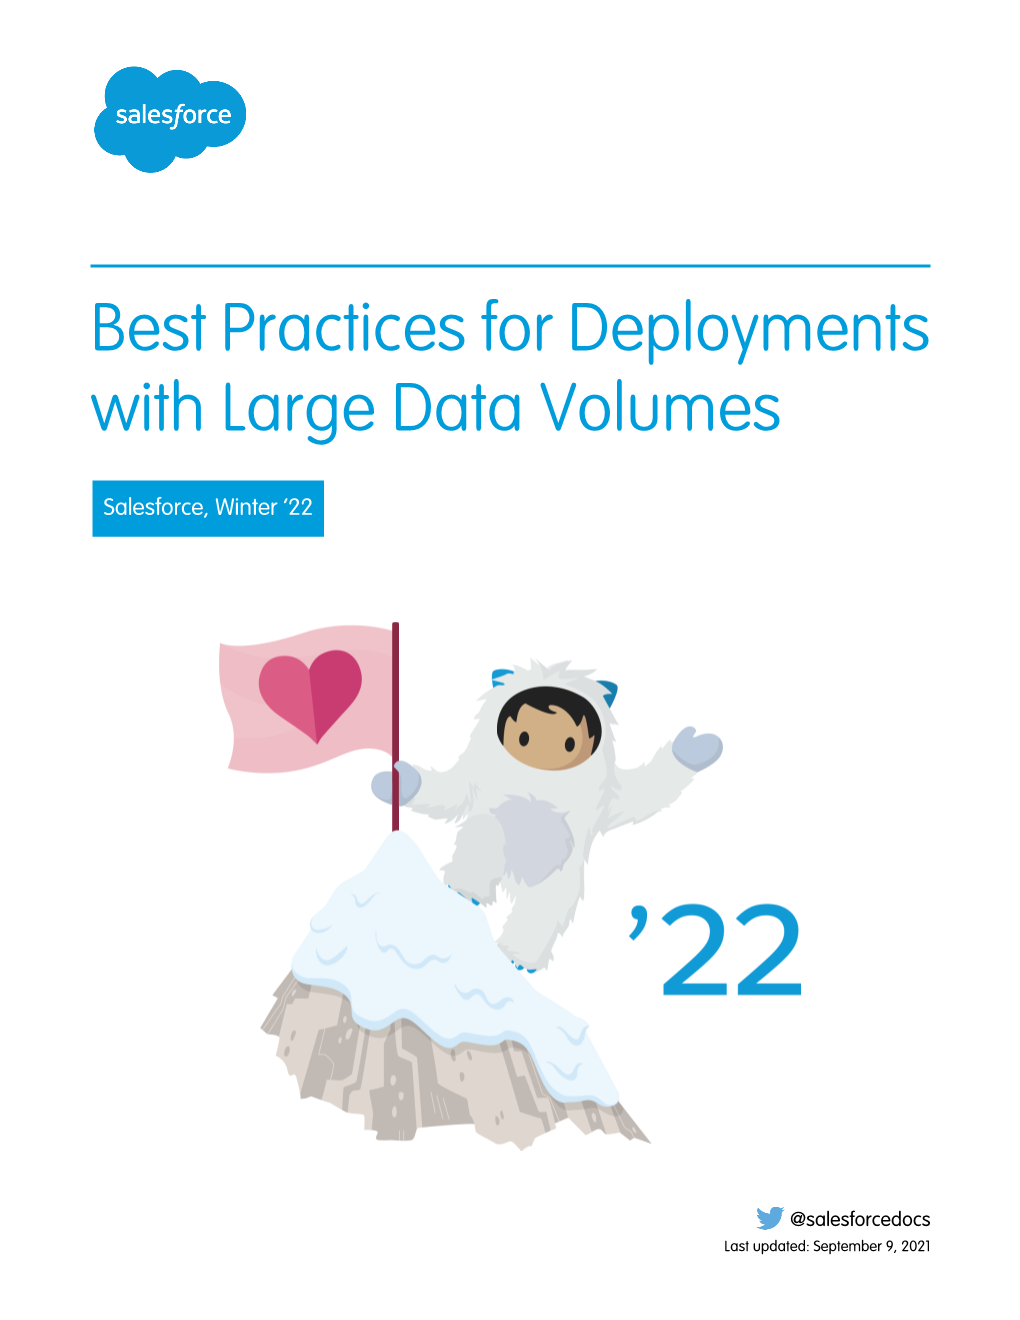 Best Practices for Deployments with Large Data Volumes